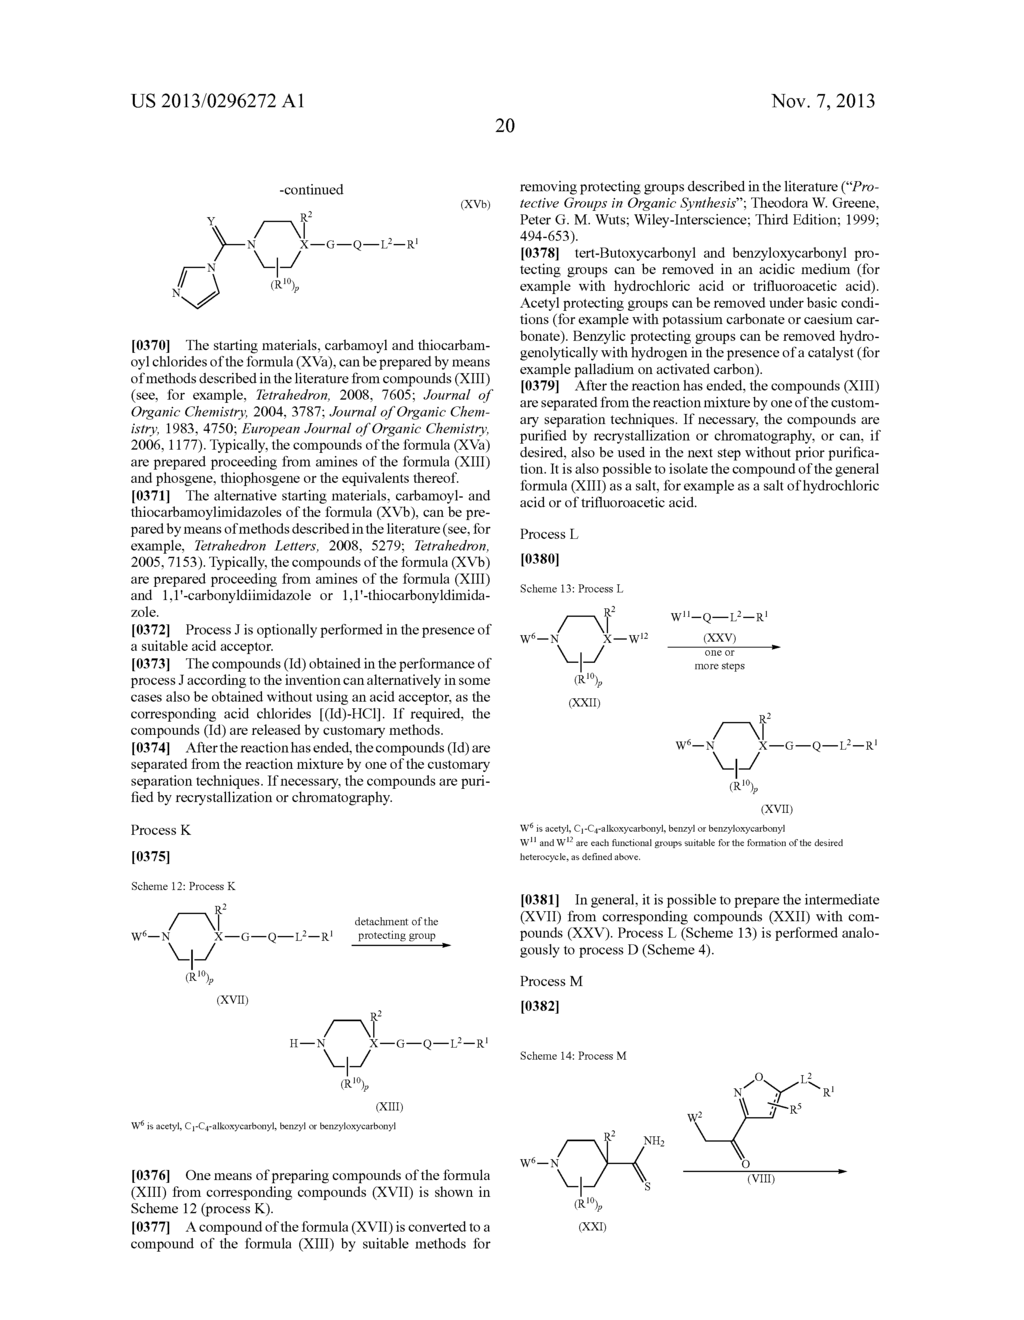 HETEROARYLPIPERIDINE AND -PIPERAZINE DERIVATIVES AS FUNGICIDES - diagram, schematic, and image 21